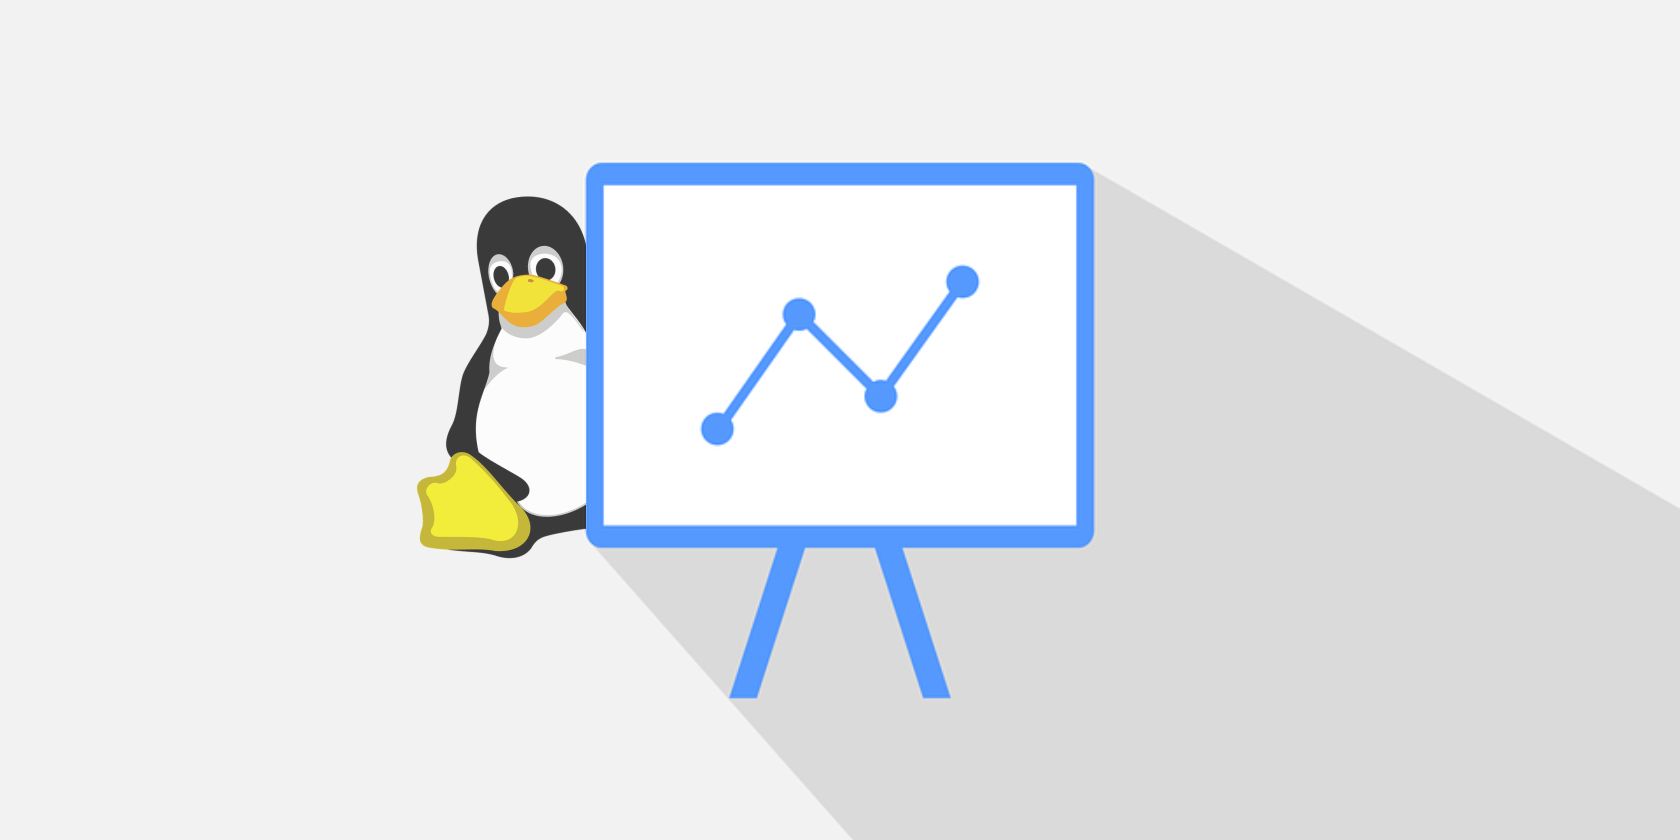 visualize data using plots and graphs linux terminal